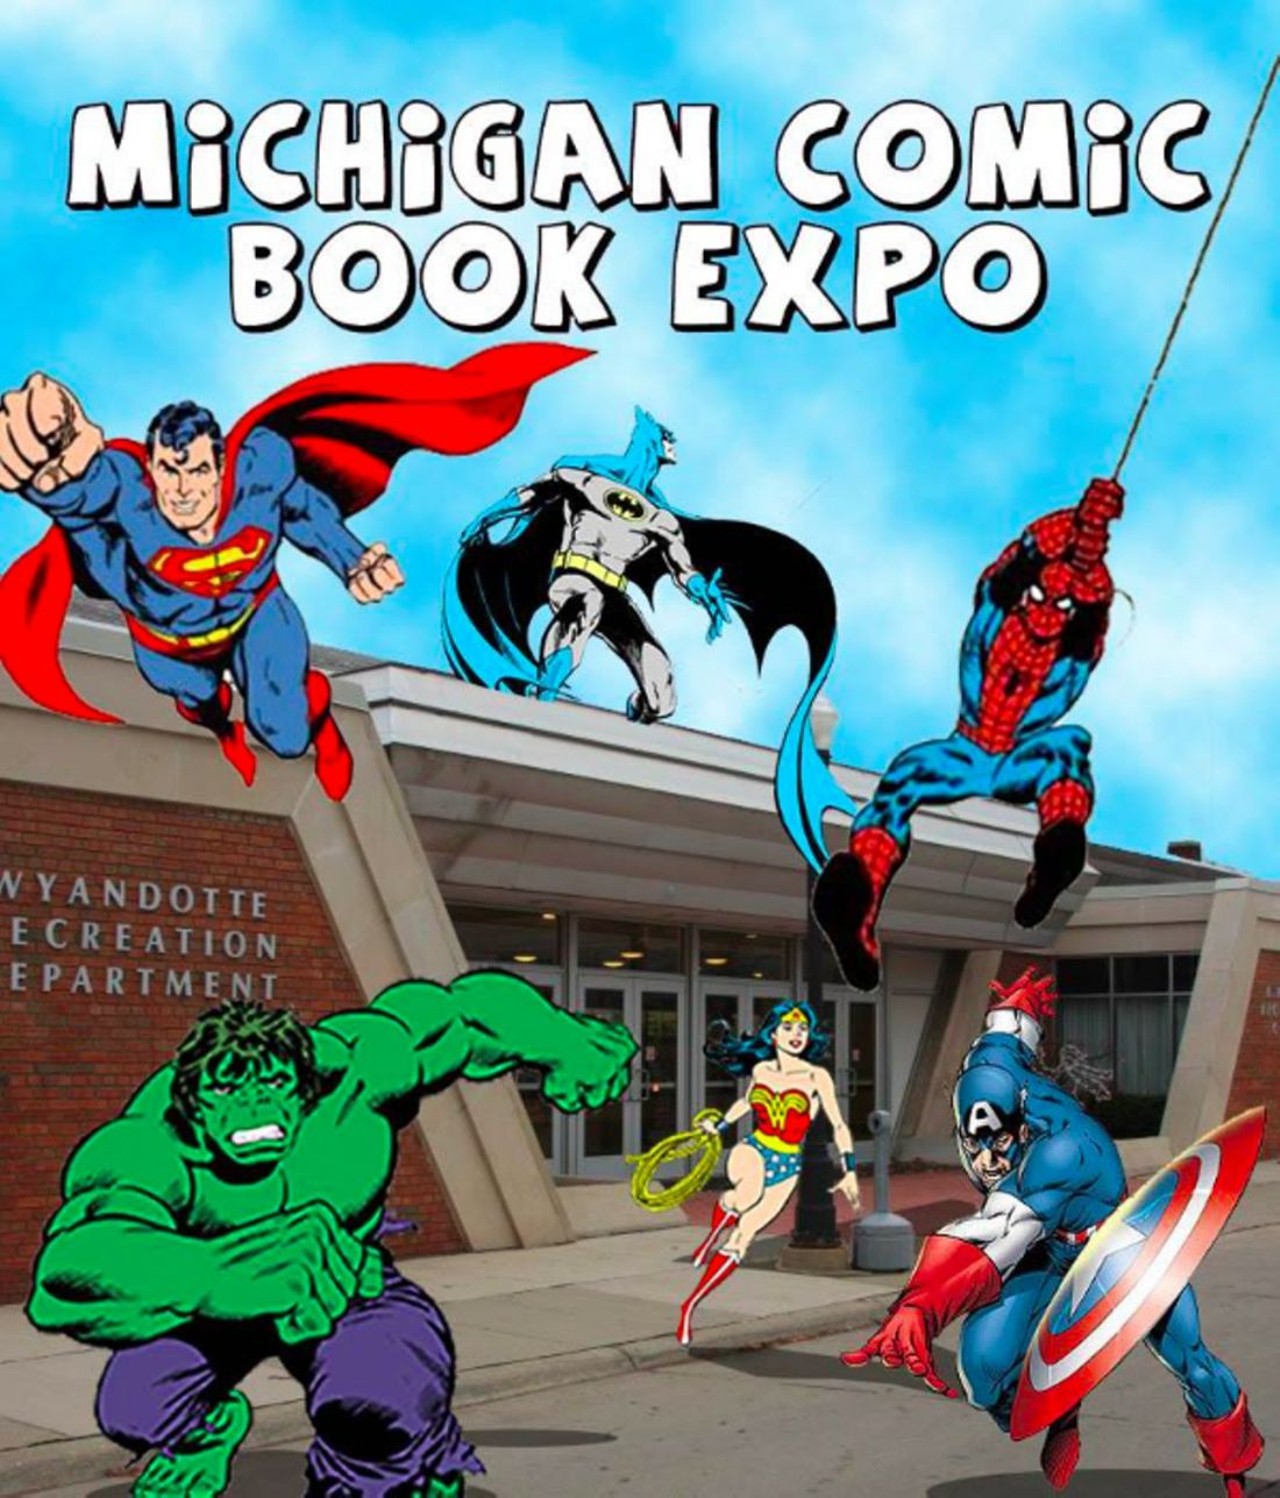 
Michigan Comic Book Expo
Sat., July 29, 12-11 p.m.
Get your geek on at this year&#146;s comic book extravaganza. From noon to 10 p.m. visitors can mingle with comic book celebrities and creators while also participating in contests and demonstrations through the day. Admission also gets you free entry to &#147;Attack the Yack,&#148; a wrestling competition and an opportunity to meet wrestling stars like Ron Simmons and Ken &#147;Mr. Kennedy&#148; Anderson.&nbsp;$10
Yack Arena&nbsp;(map)
3131 Third
Greater Detroit Area&nbsp;
&nbsp;(734) 324-7265
